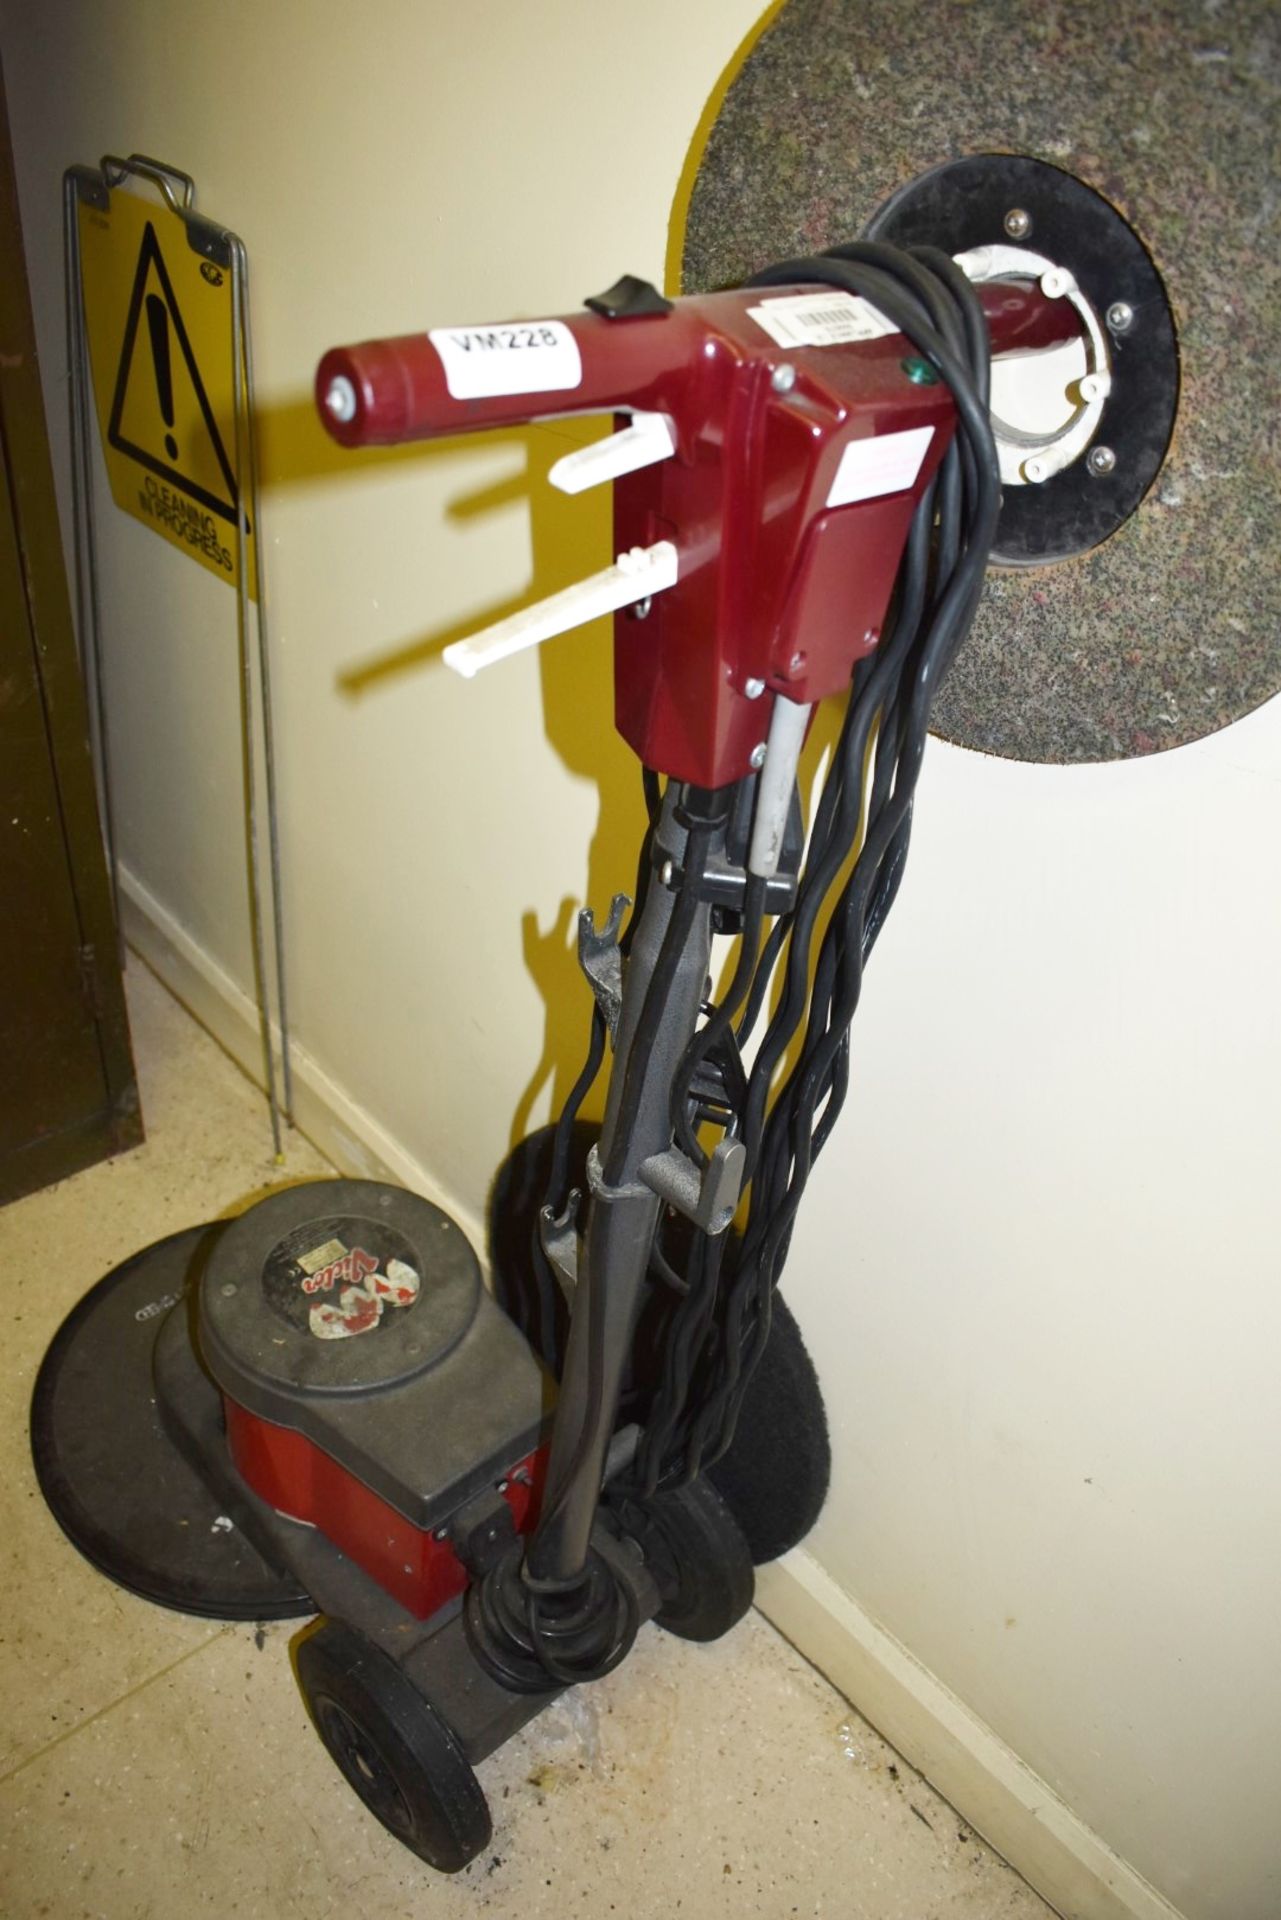 1 x Victor Sprite 300 Rotary Floor Polisher - RRP £700 - Training Room Use Only - Ref VM228 B2 - - Image 2 of 3